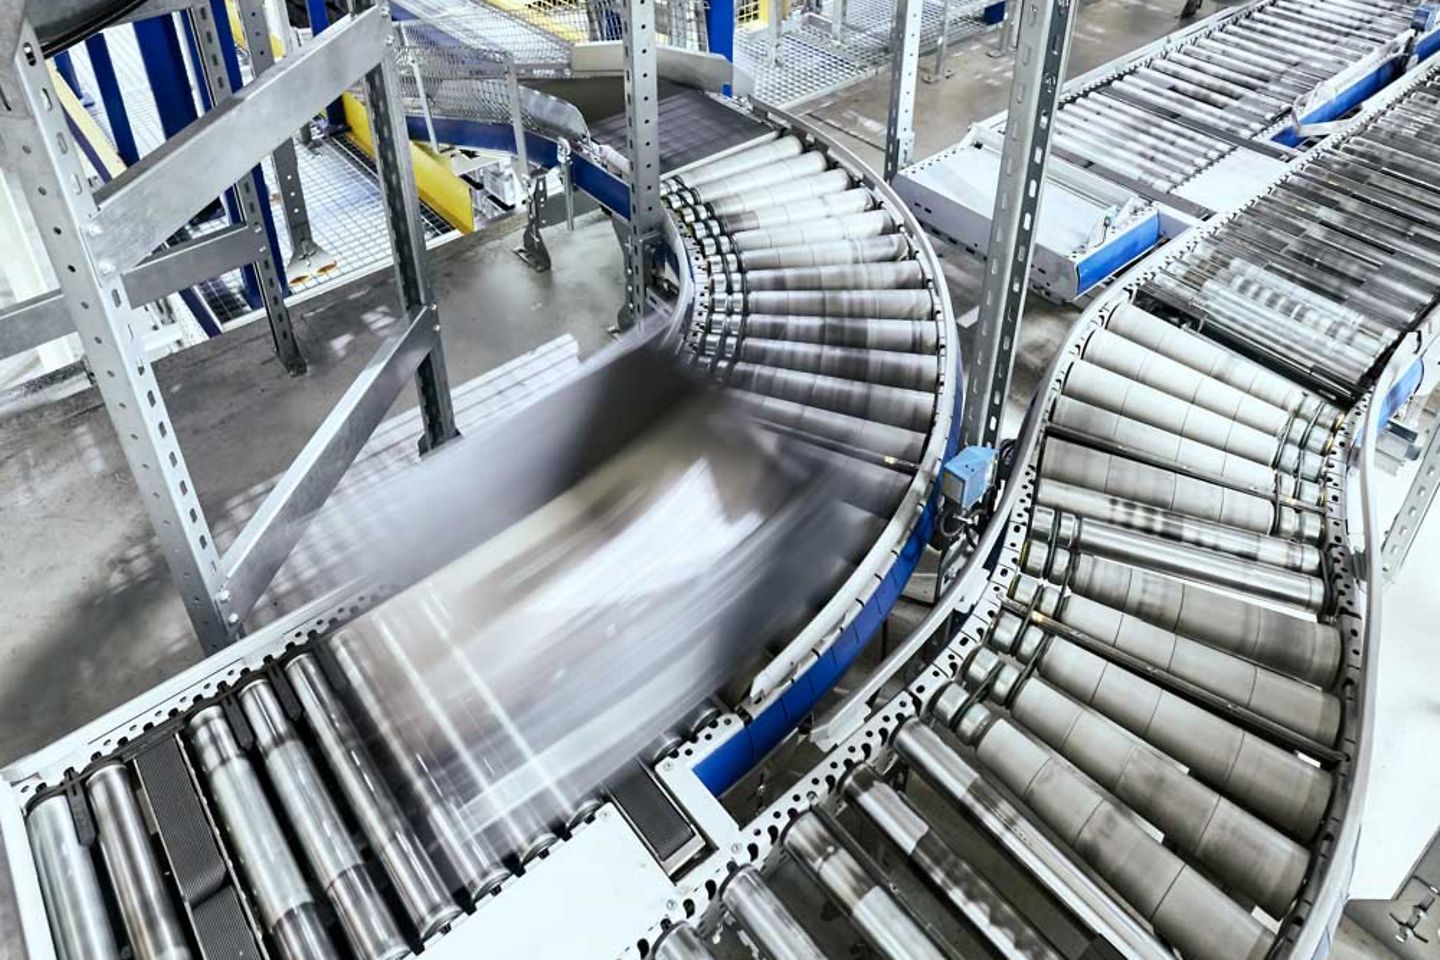 A moving conveyor belt in a factory